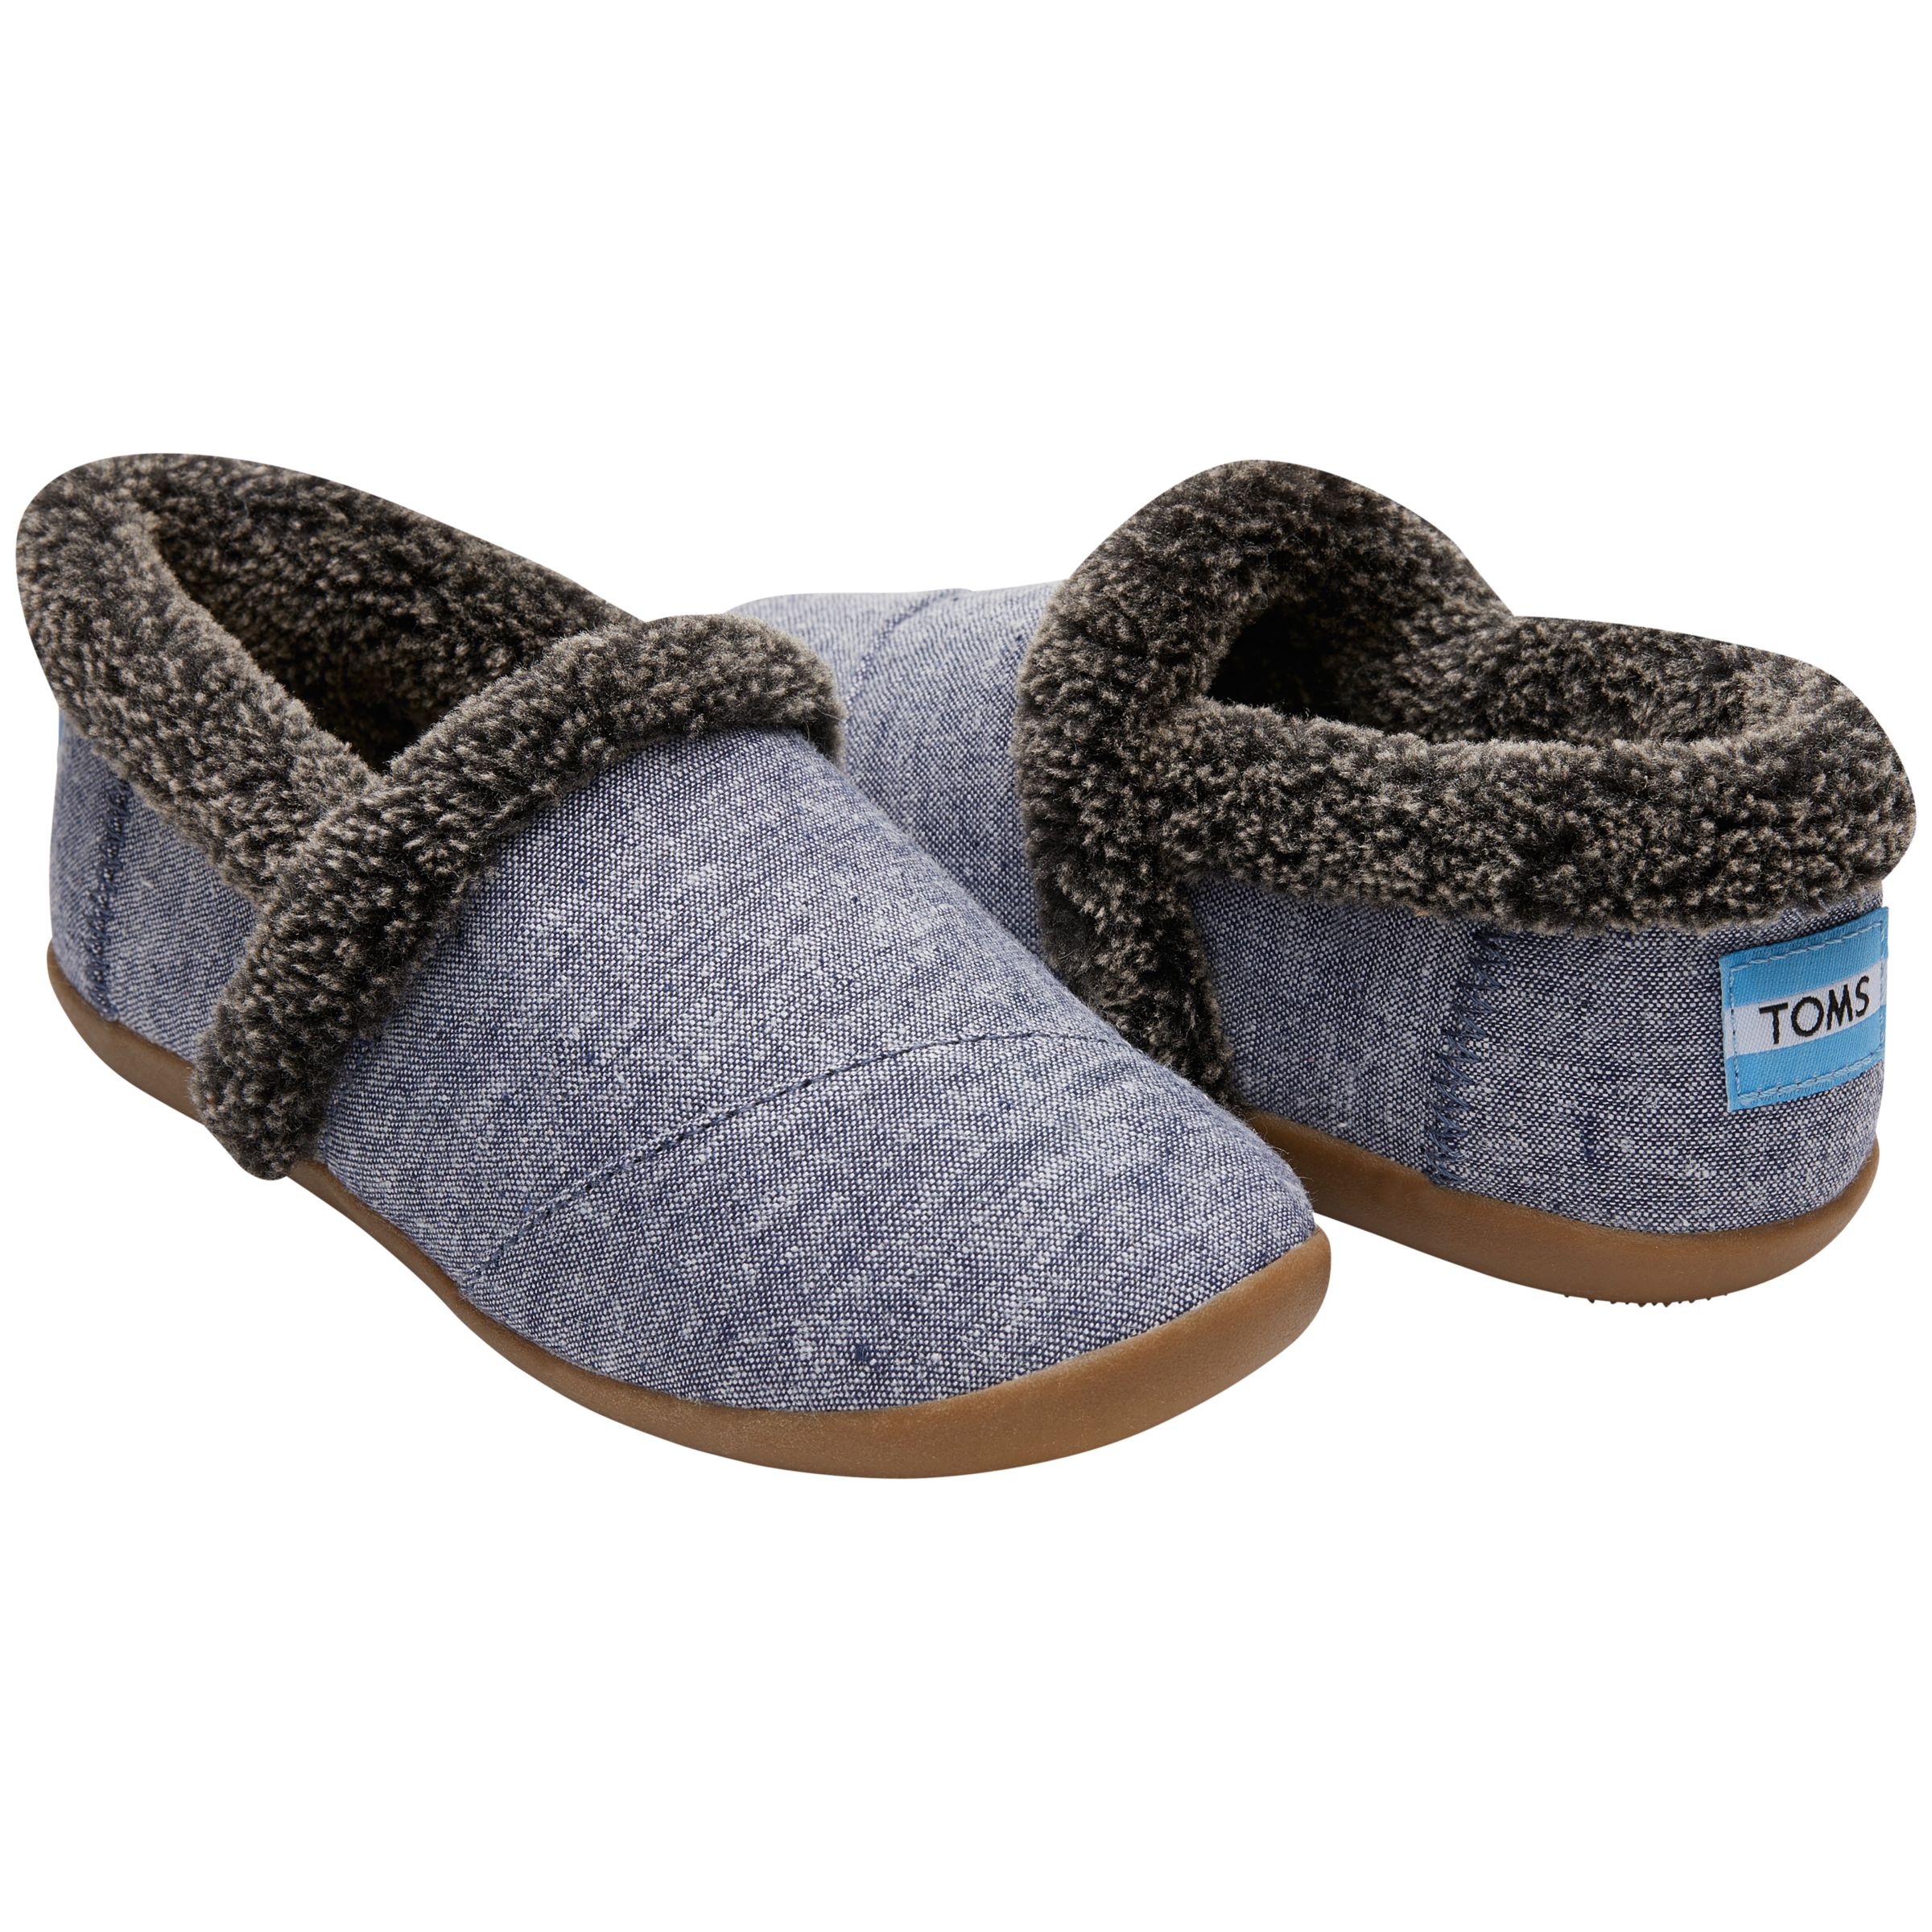 TOMS House Slippers, Chambray, 13 Jnr